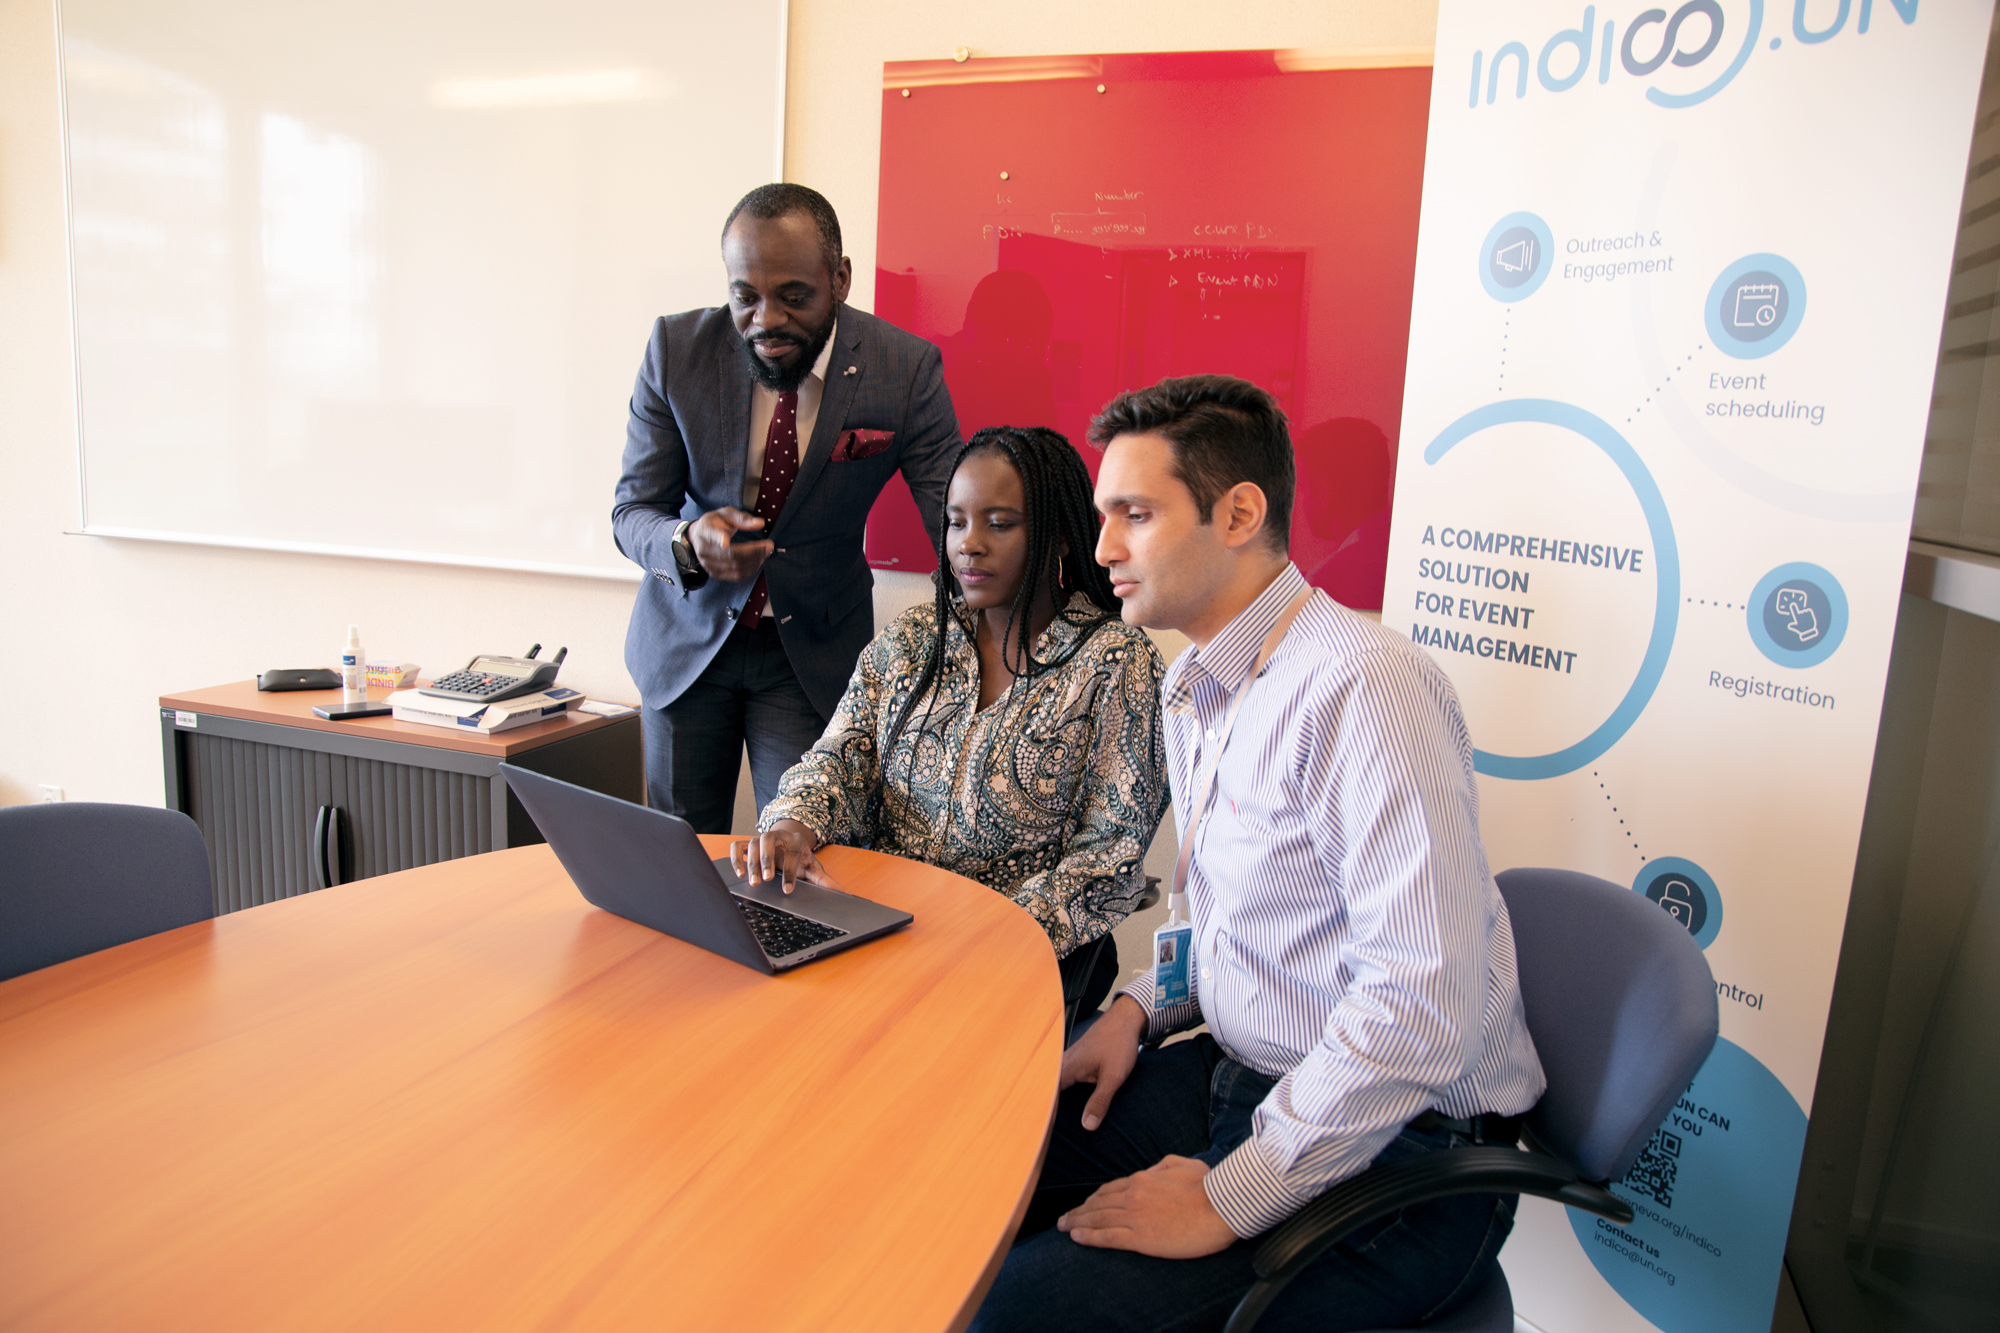 A woman sits at a wooden table using a laptop, while two men are on either side of her, watching. Behind them are a white board, a red glass whiteboard with writing and a poster with Indico branding.